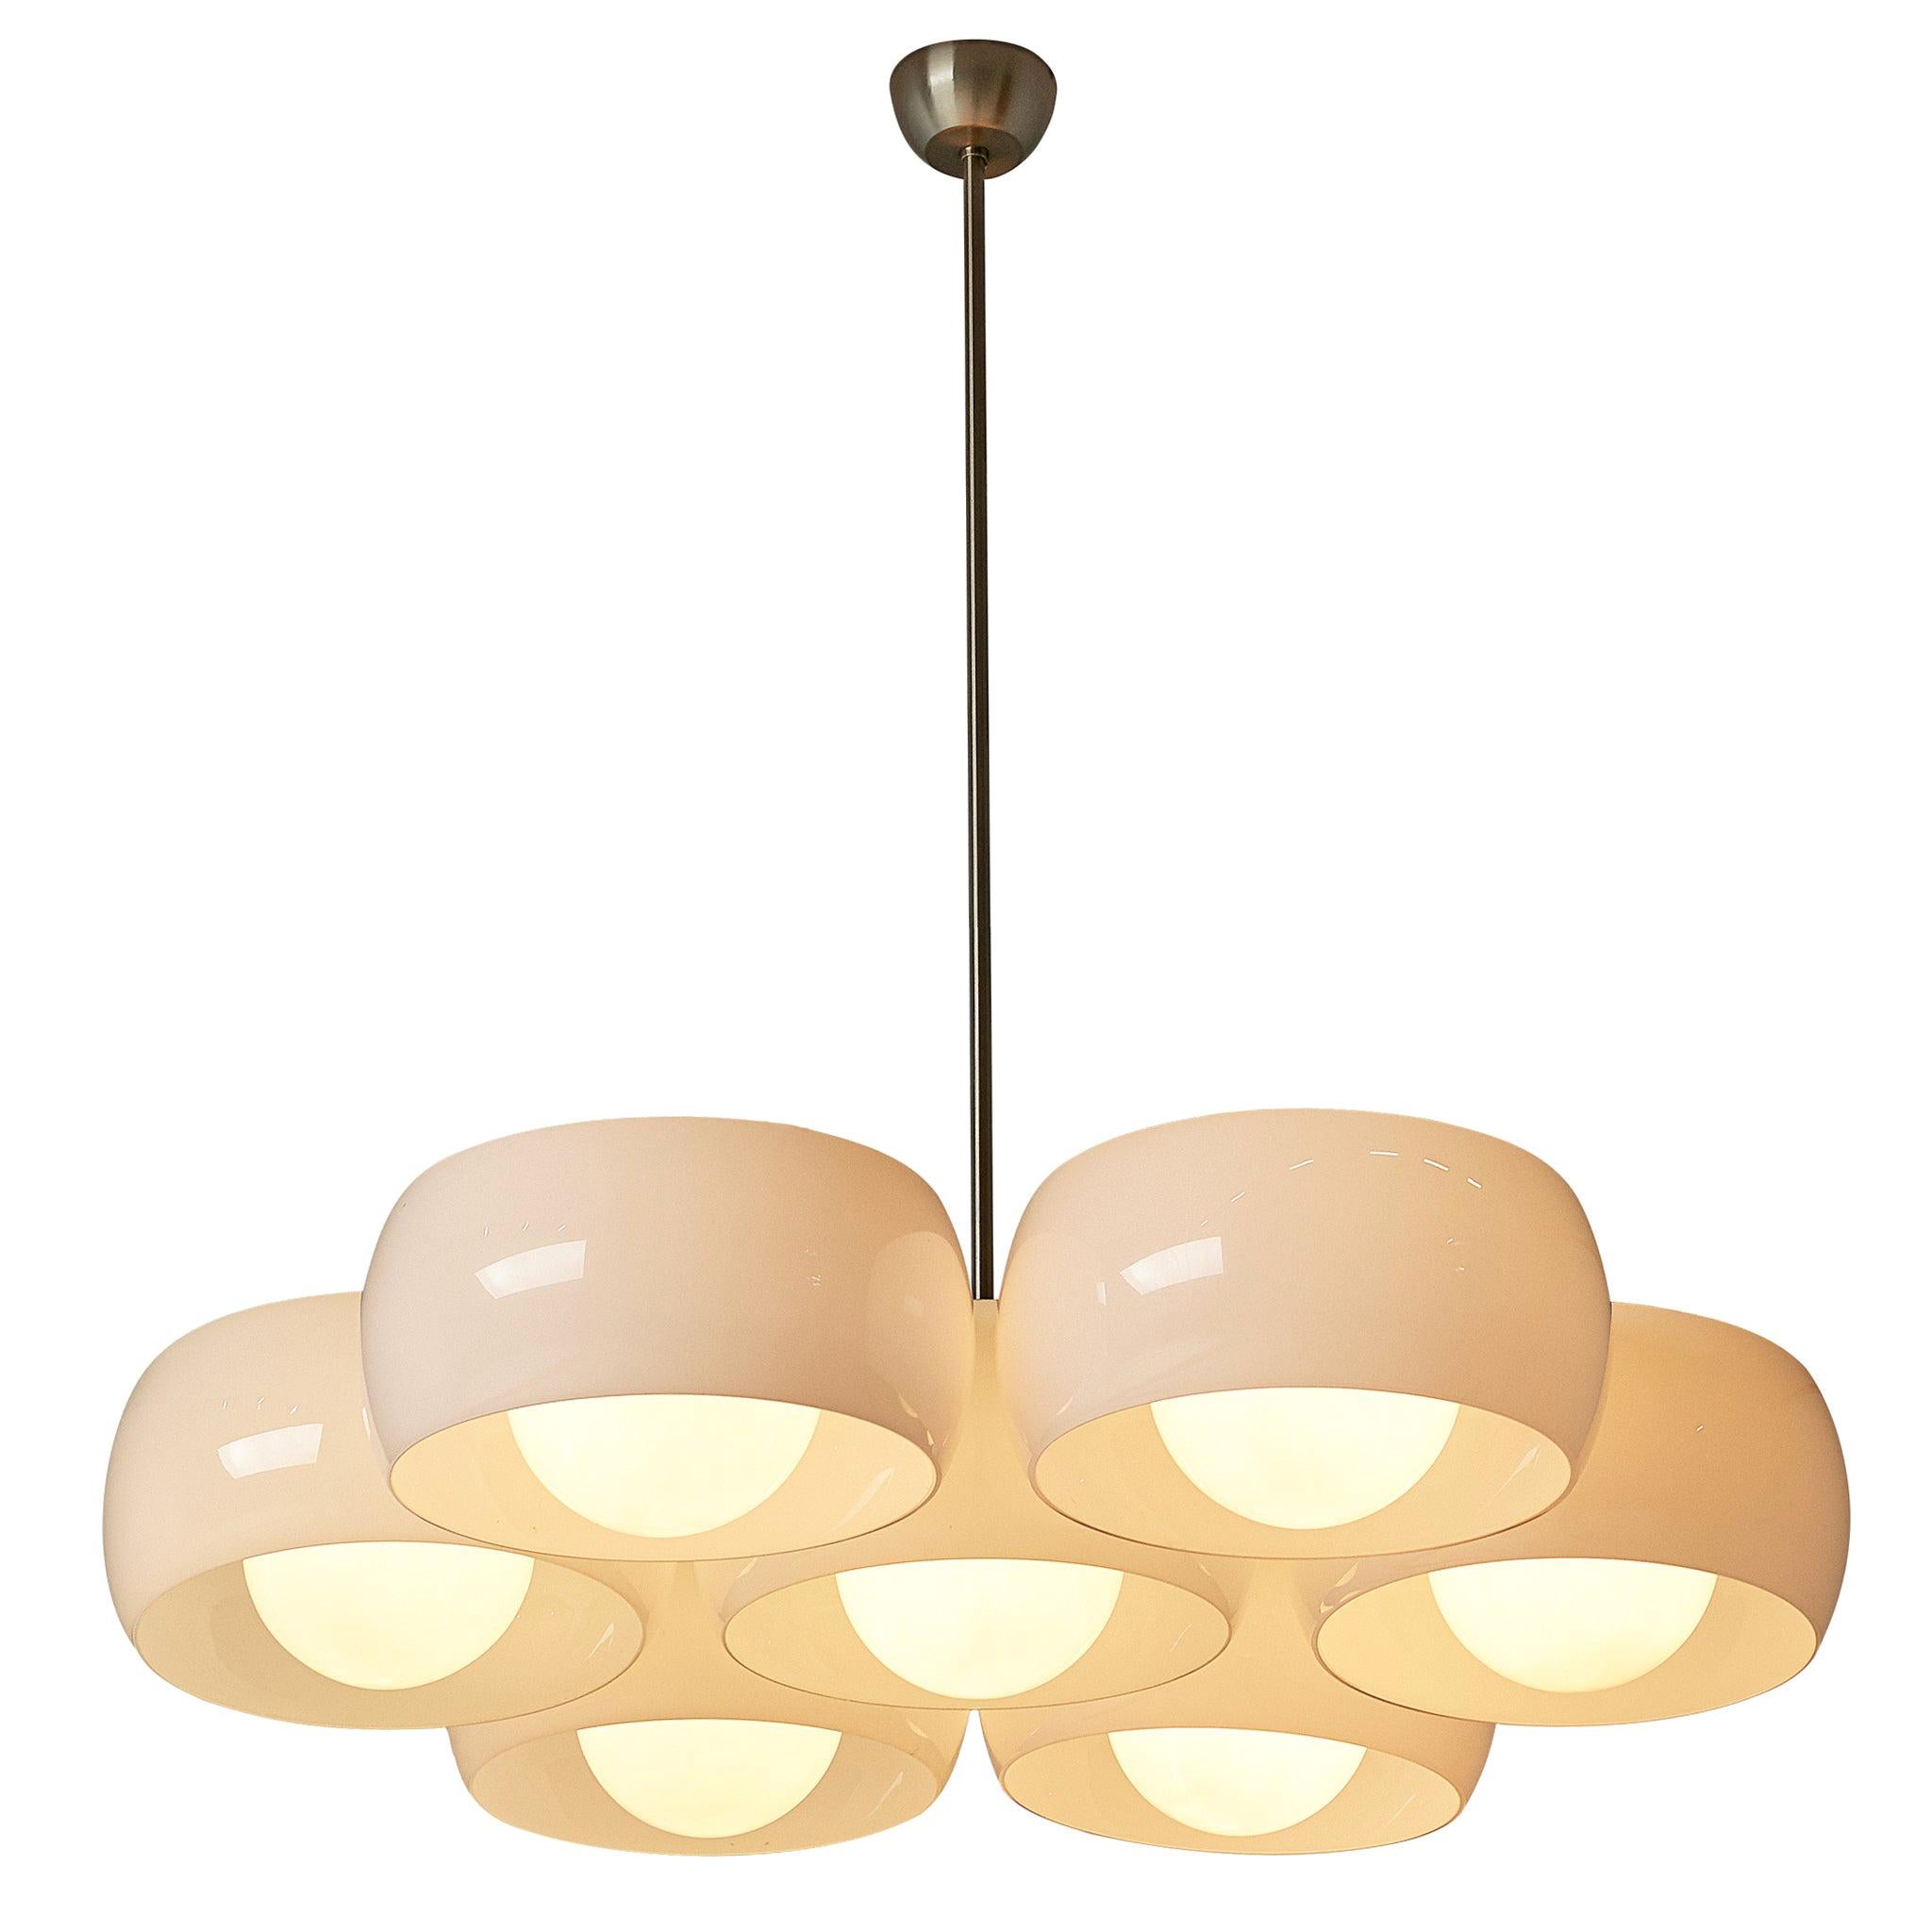 Listing for KNS: Vico Magistretti for Artemide Chandelier 'Eptaclinio'